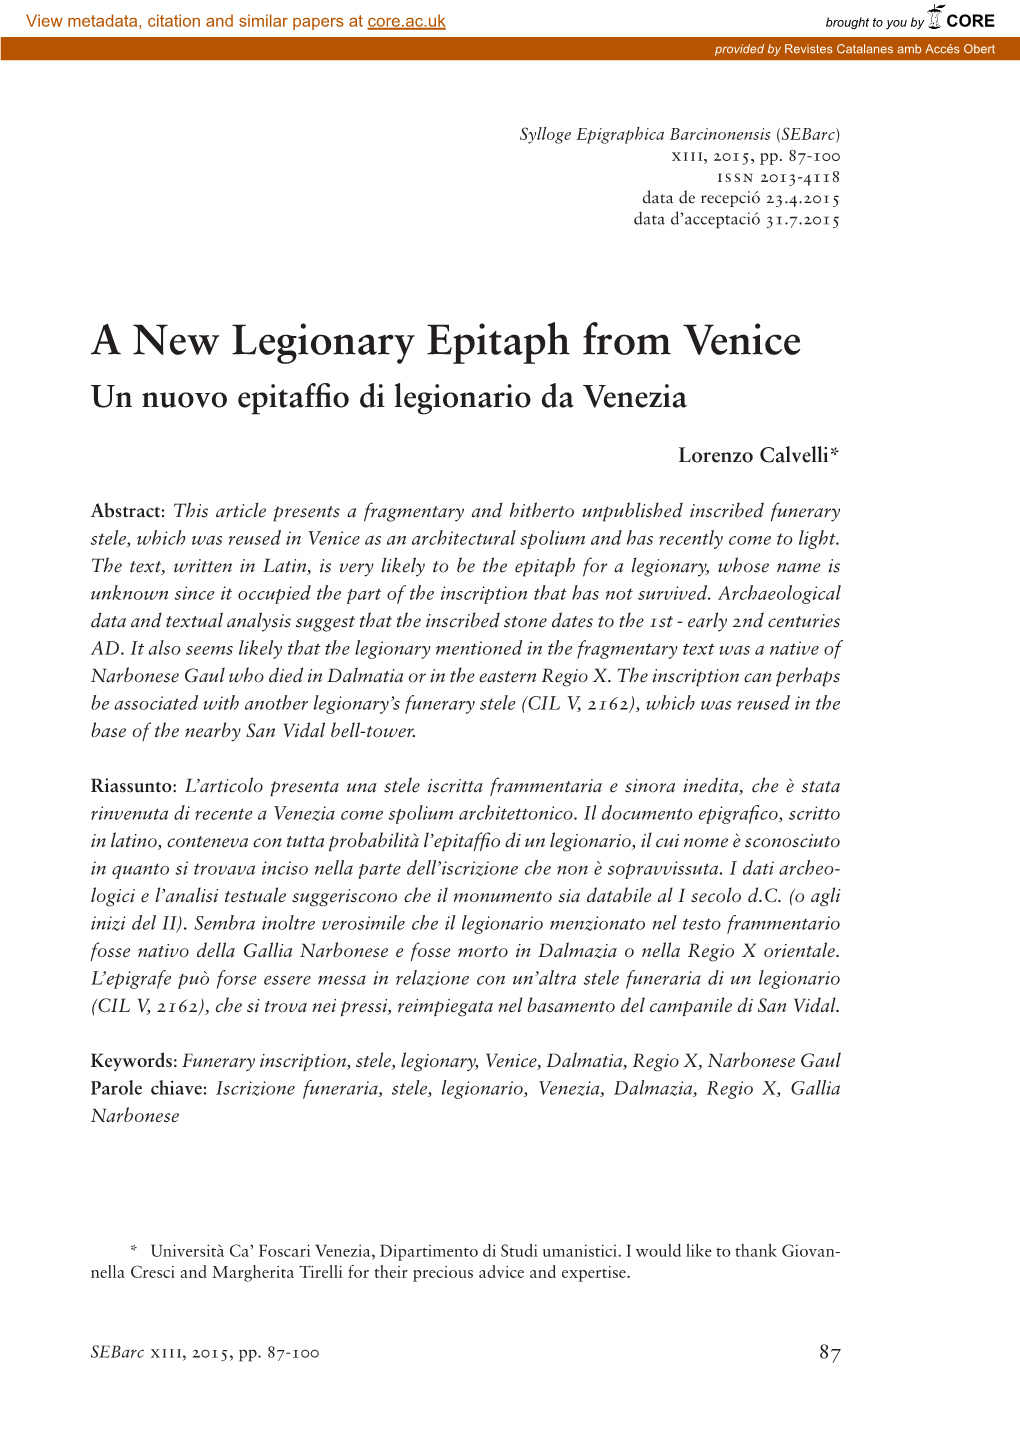 A New Legionary Epitaph from Venice…